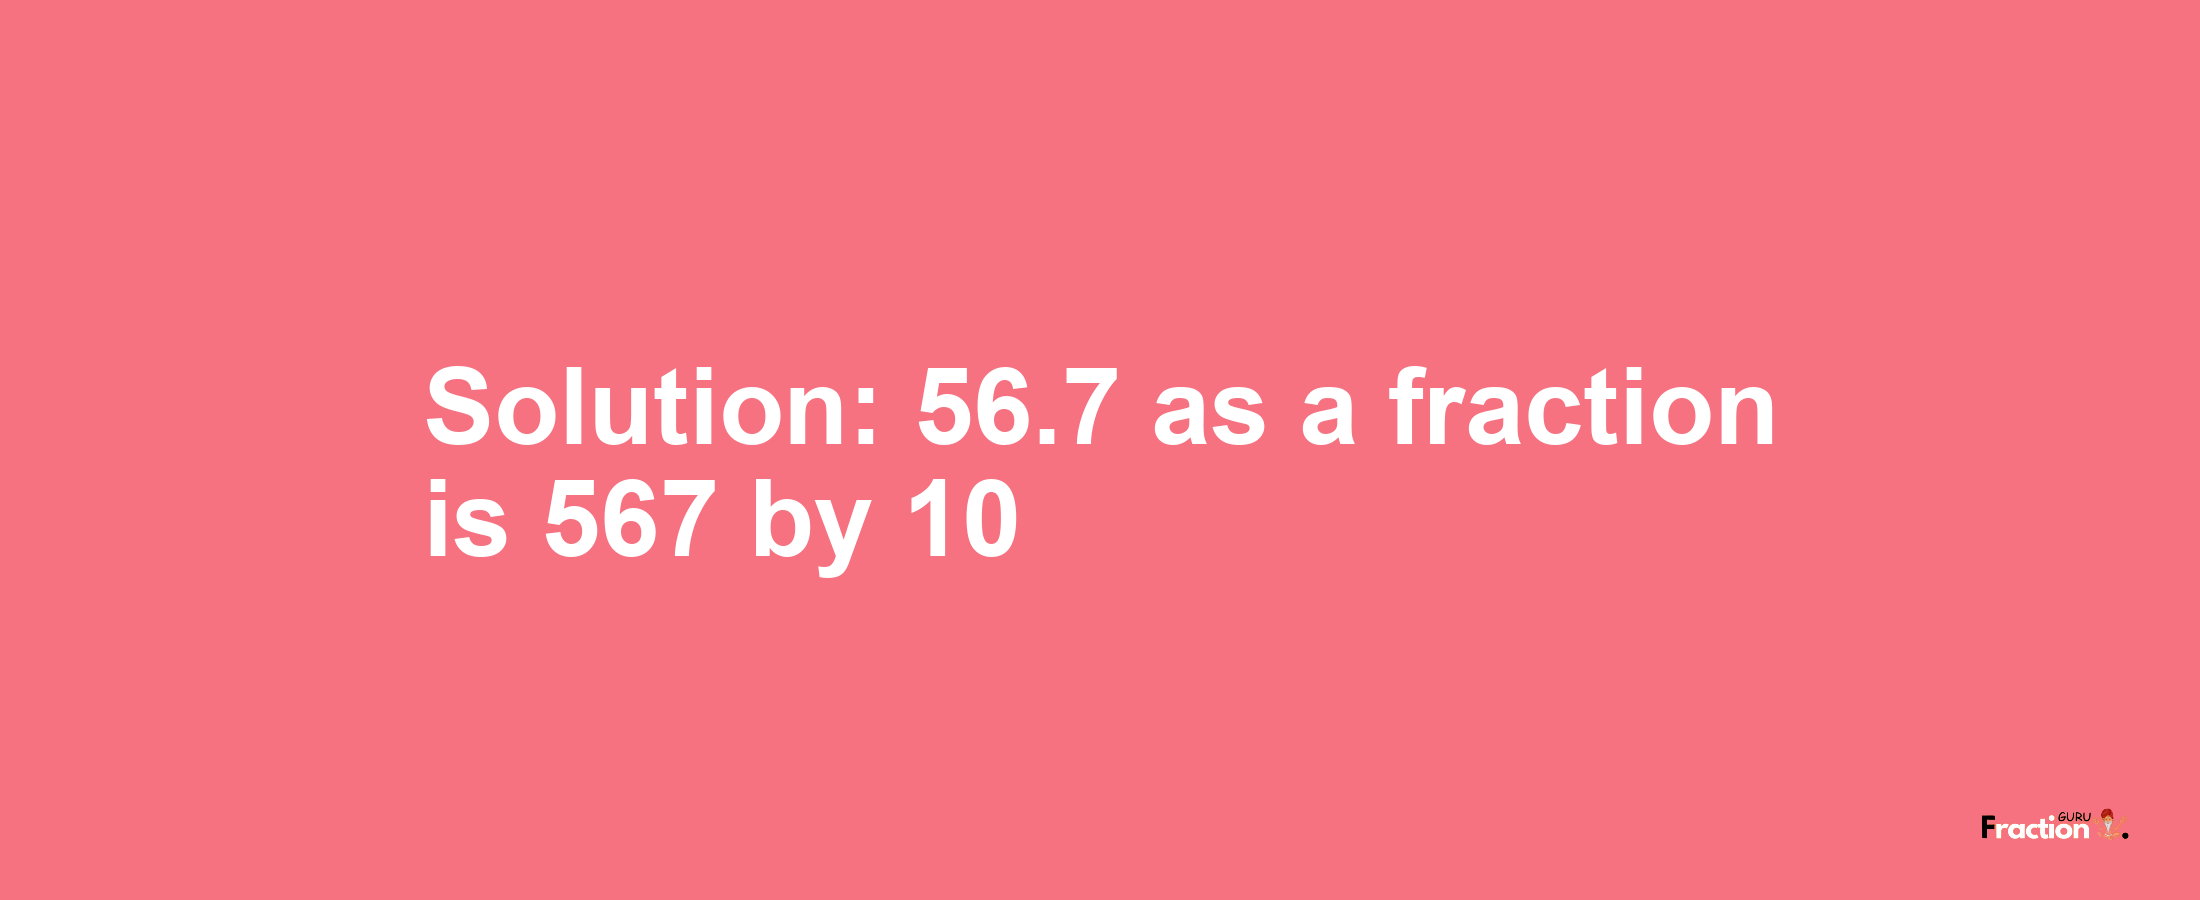 Solution:56.7 as a fraction is 567/10